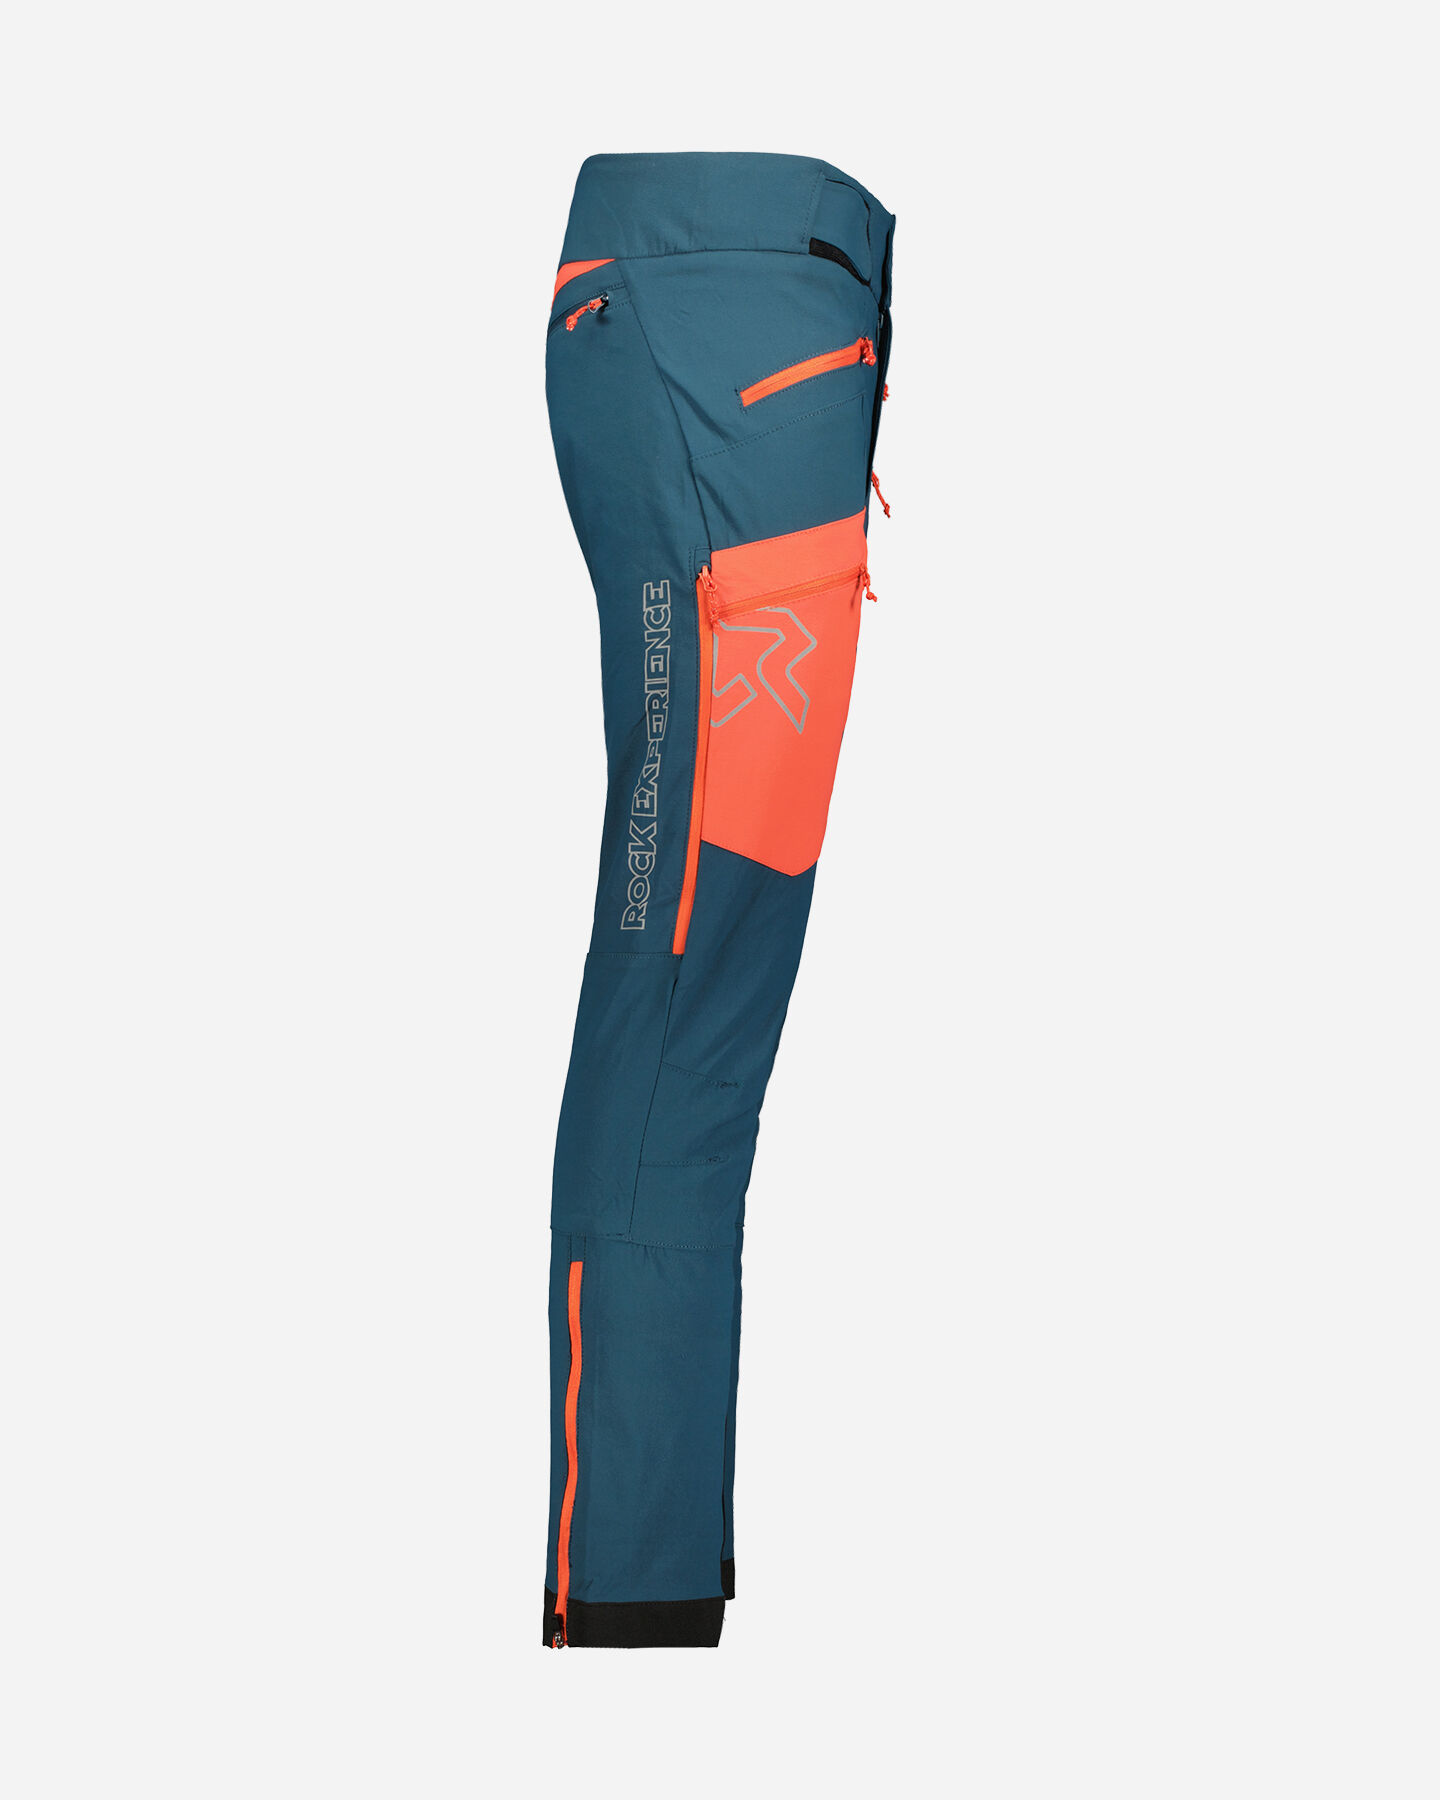  Pantalone outdoor ROCK EXPERIENCE TOWER M S4115482|C786|S scatto 1